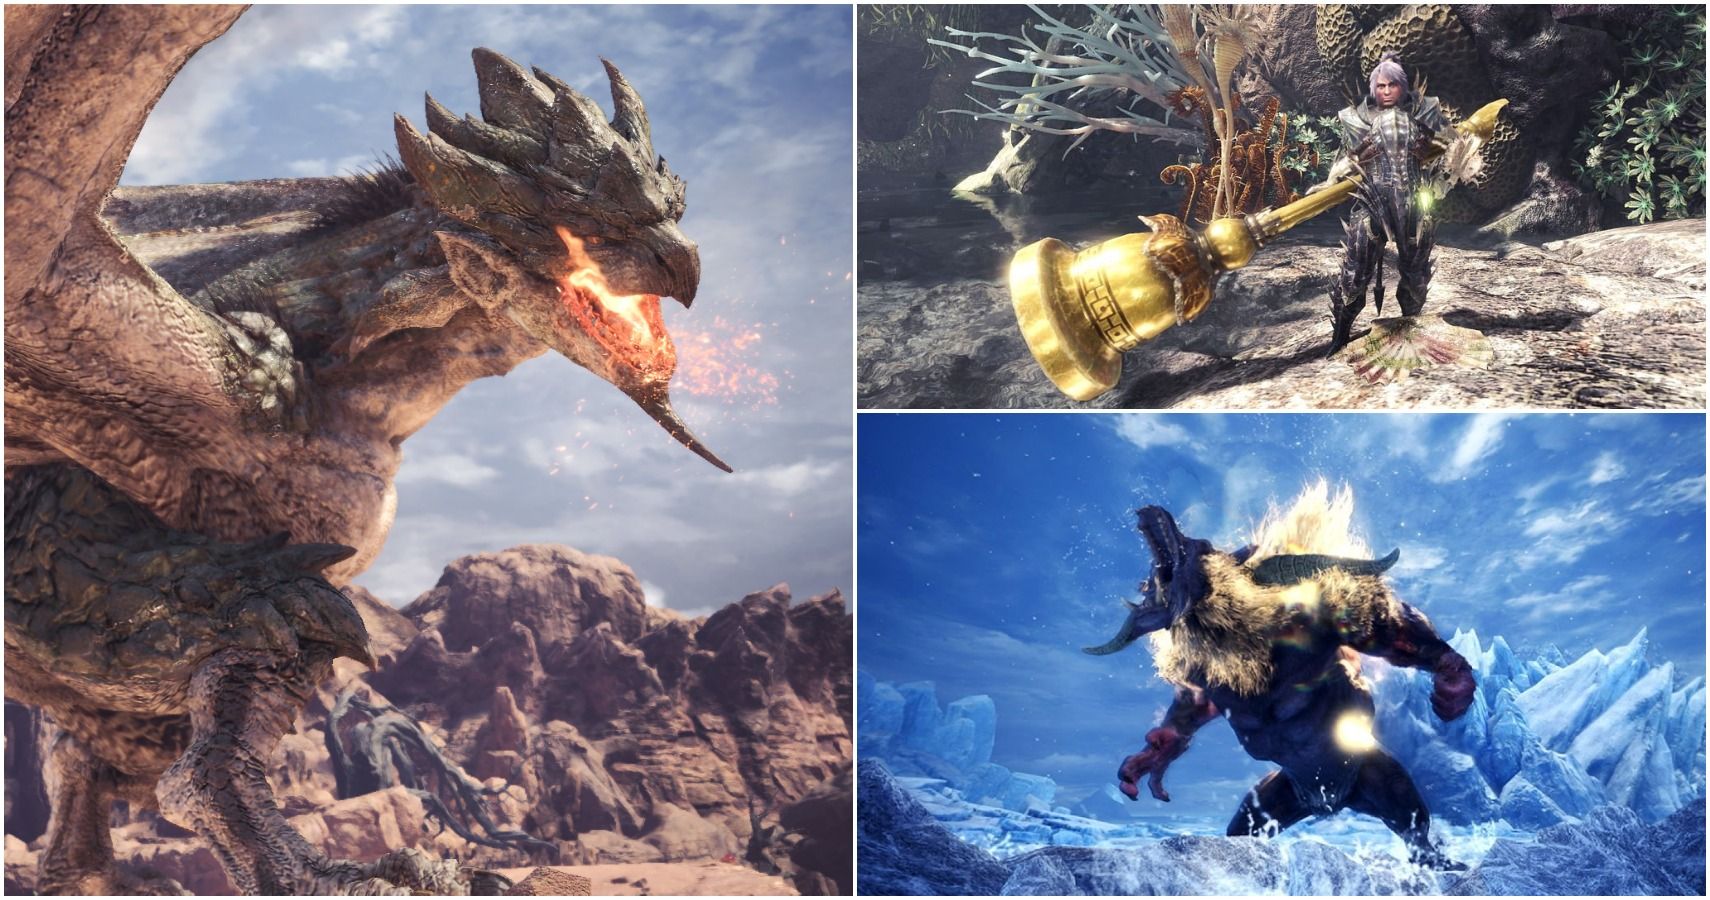 Monster Hunter World will not be live for 10 years